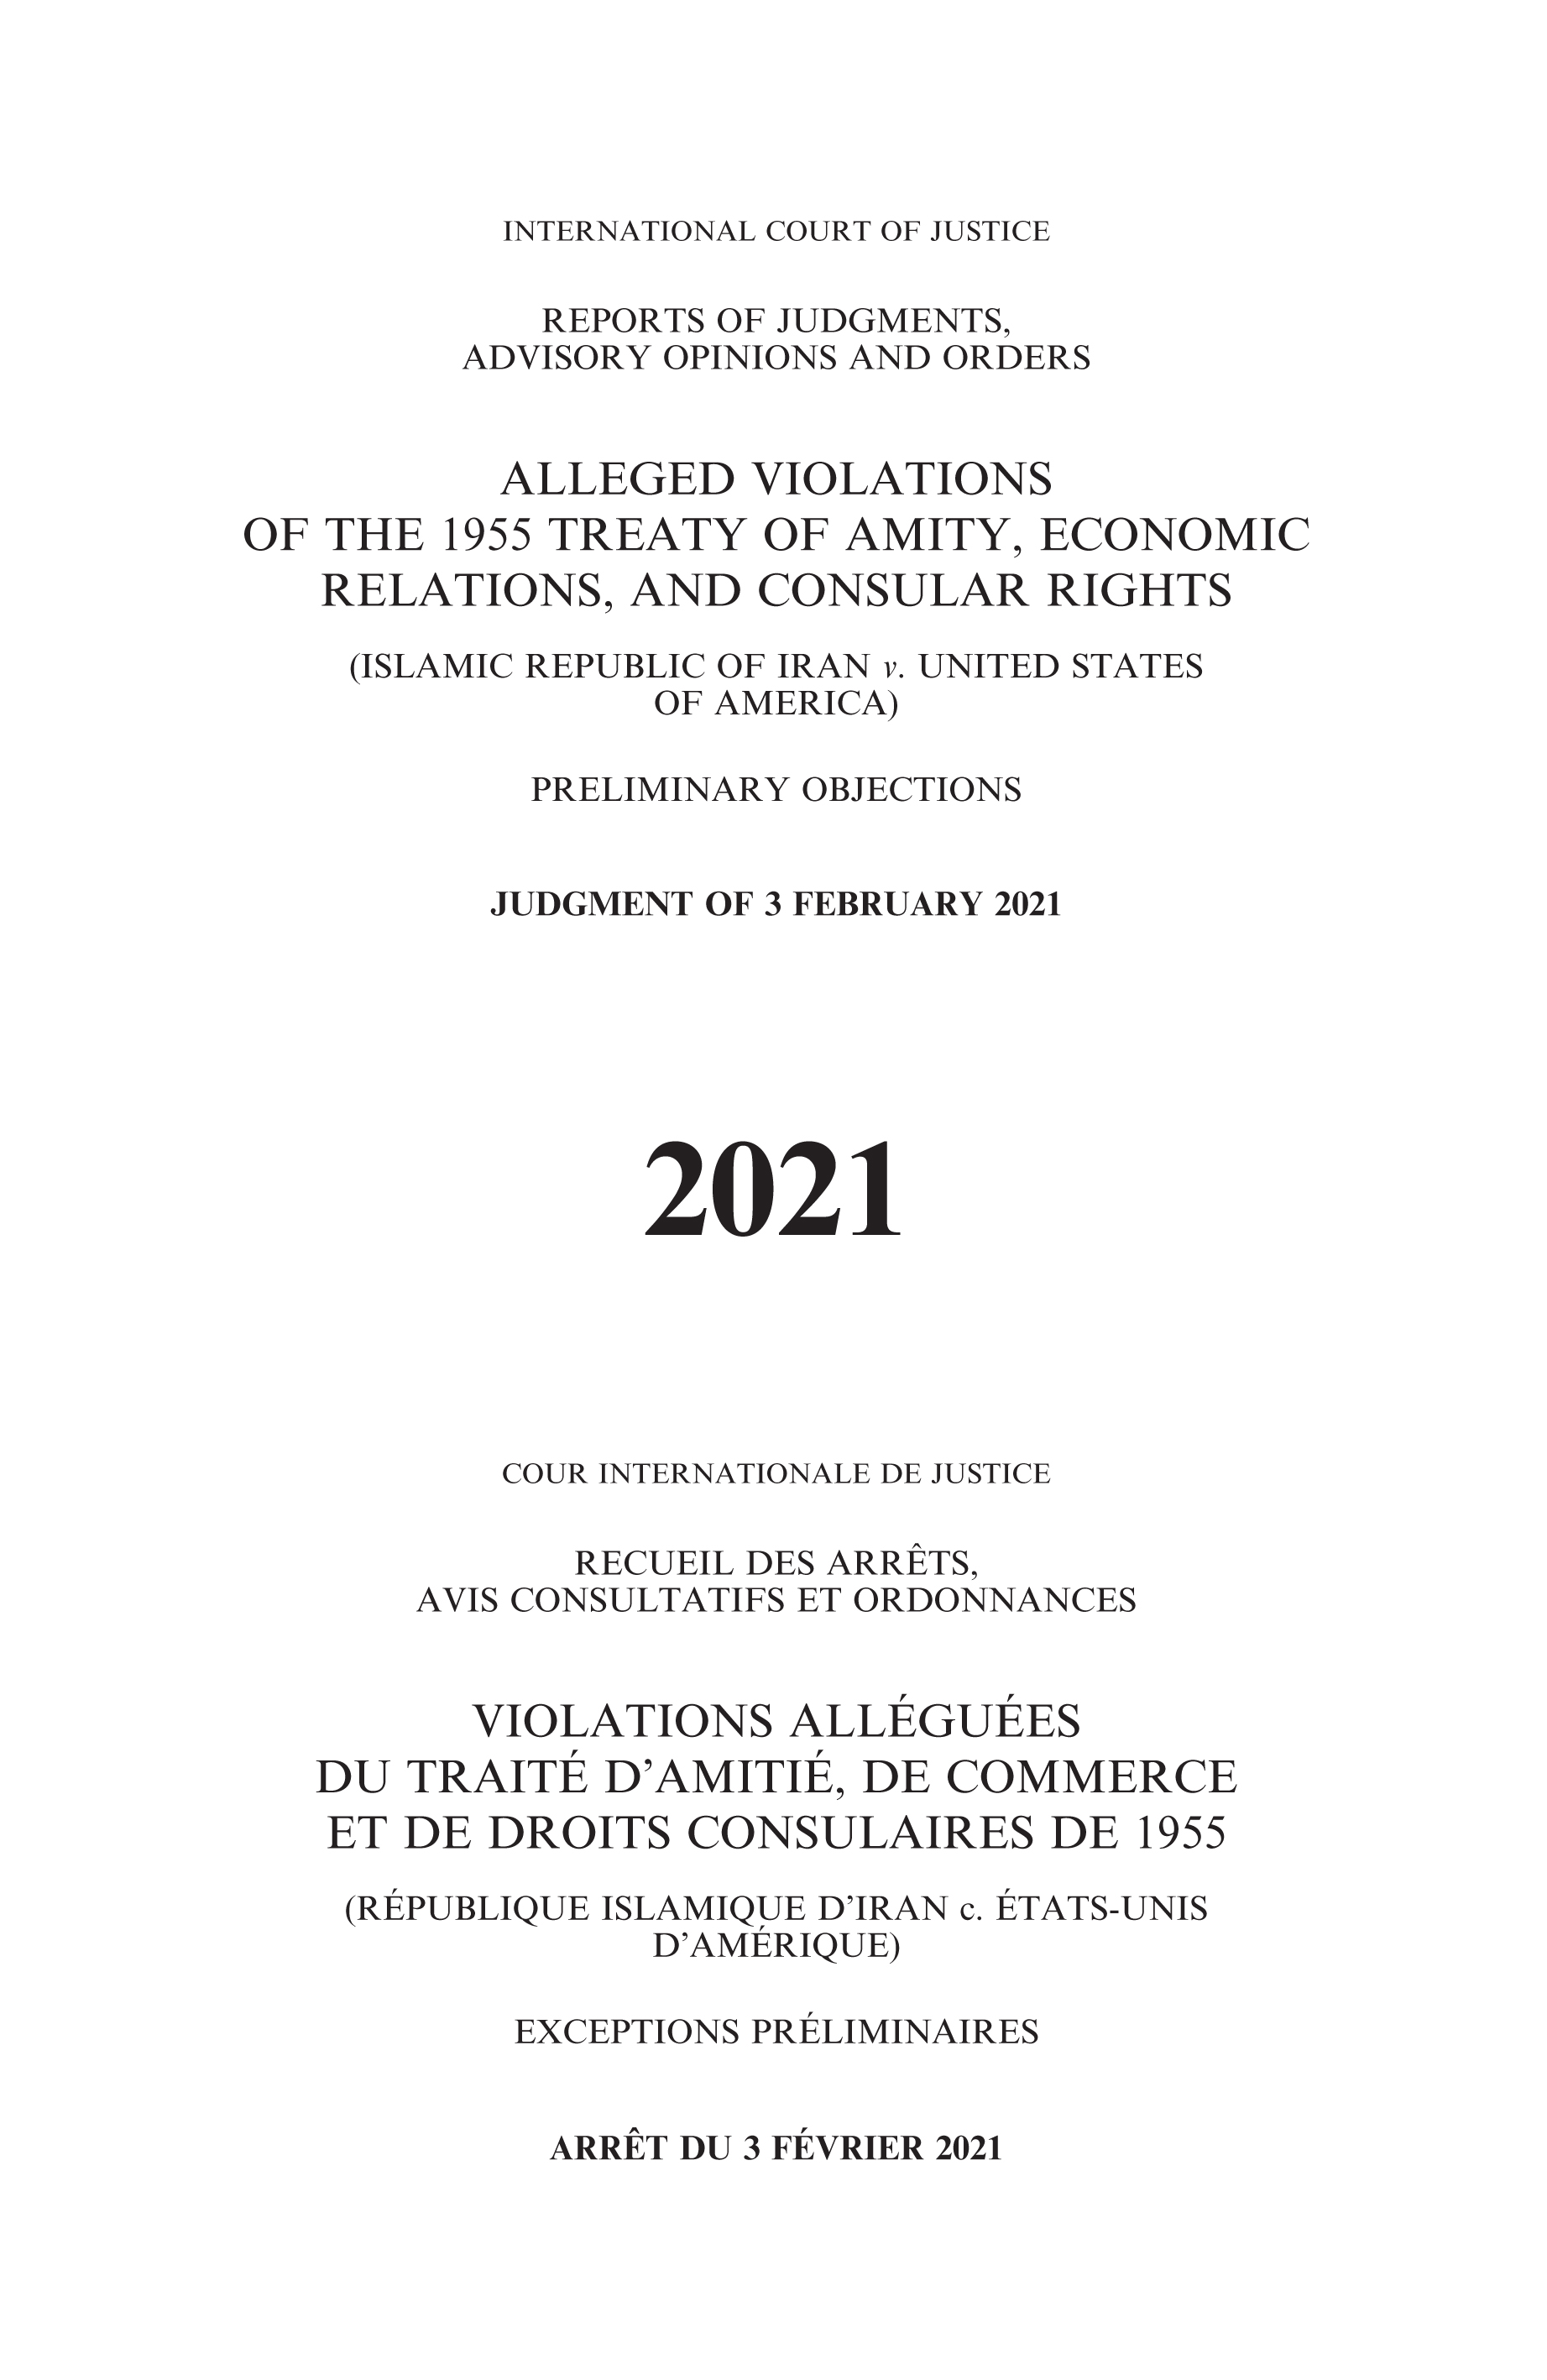 image of Reports of Judgments, Advisory Opinions and Orders 2021: Alleged Violations of the 1955 Treaty of Amity, Economic Relations, and Consular Rights (Islamic Republic of Iran v. United States of America)